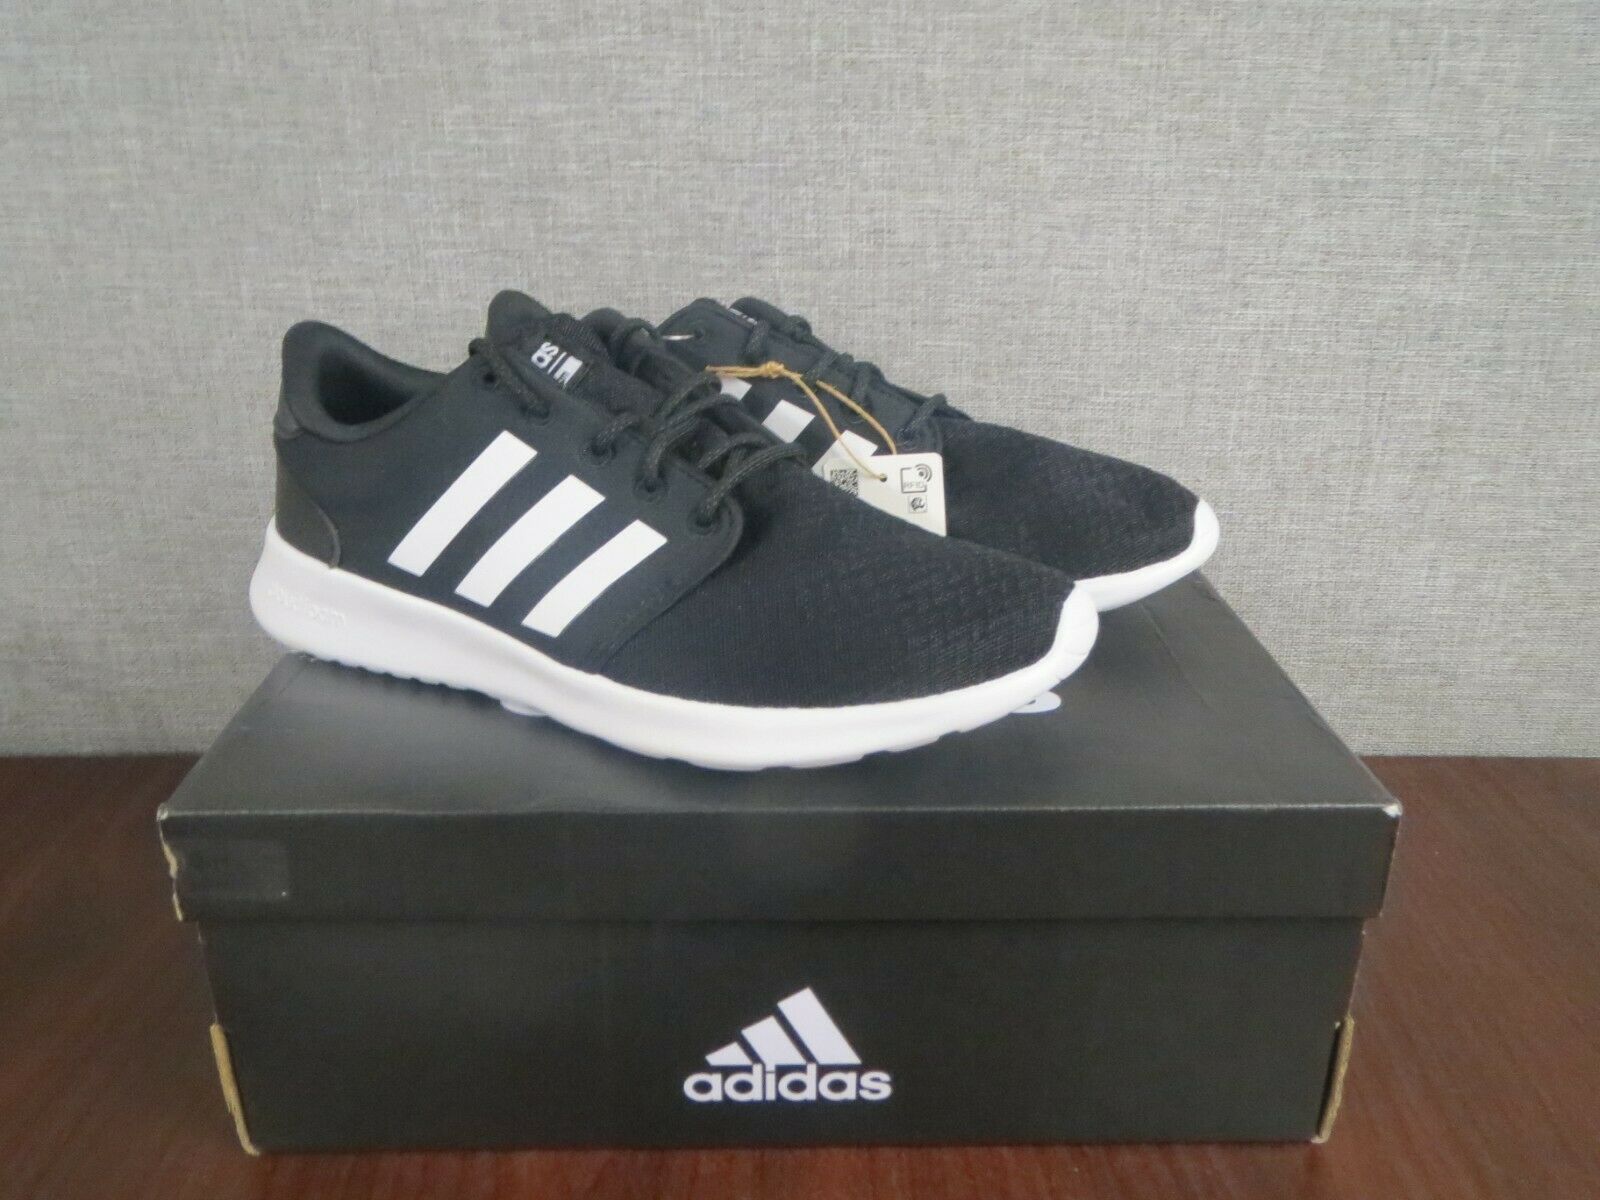 Adidas Women's Qt Racer Running Shoe Black Size 8.5 ~NEW IN BOX W/TAGS~